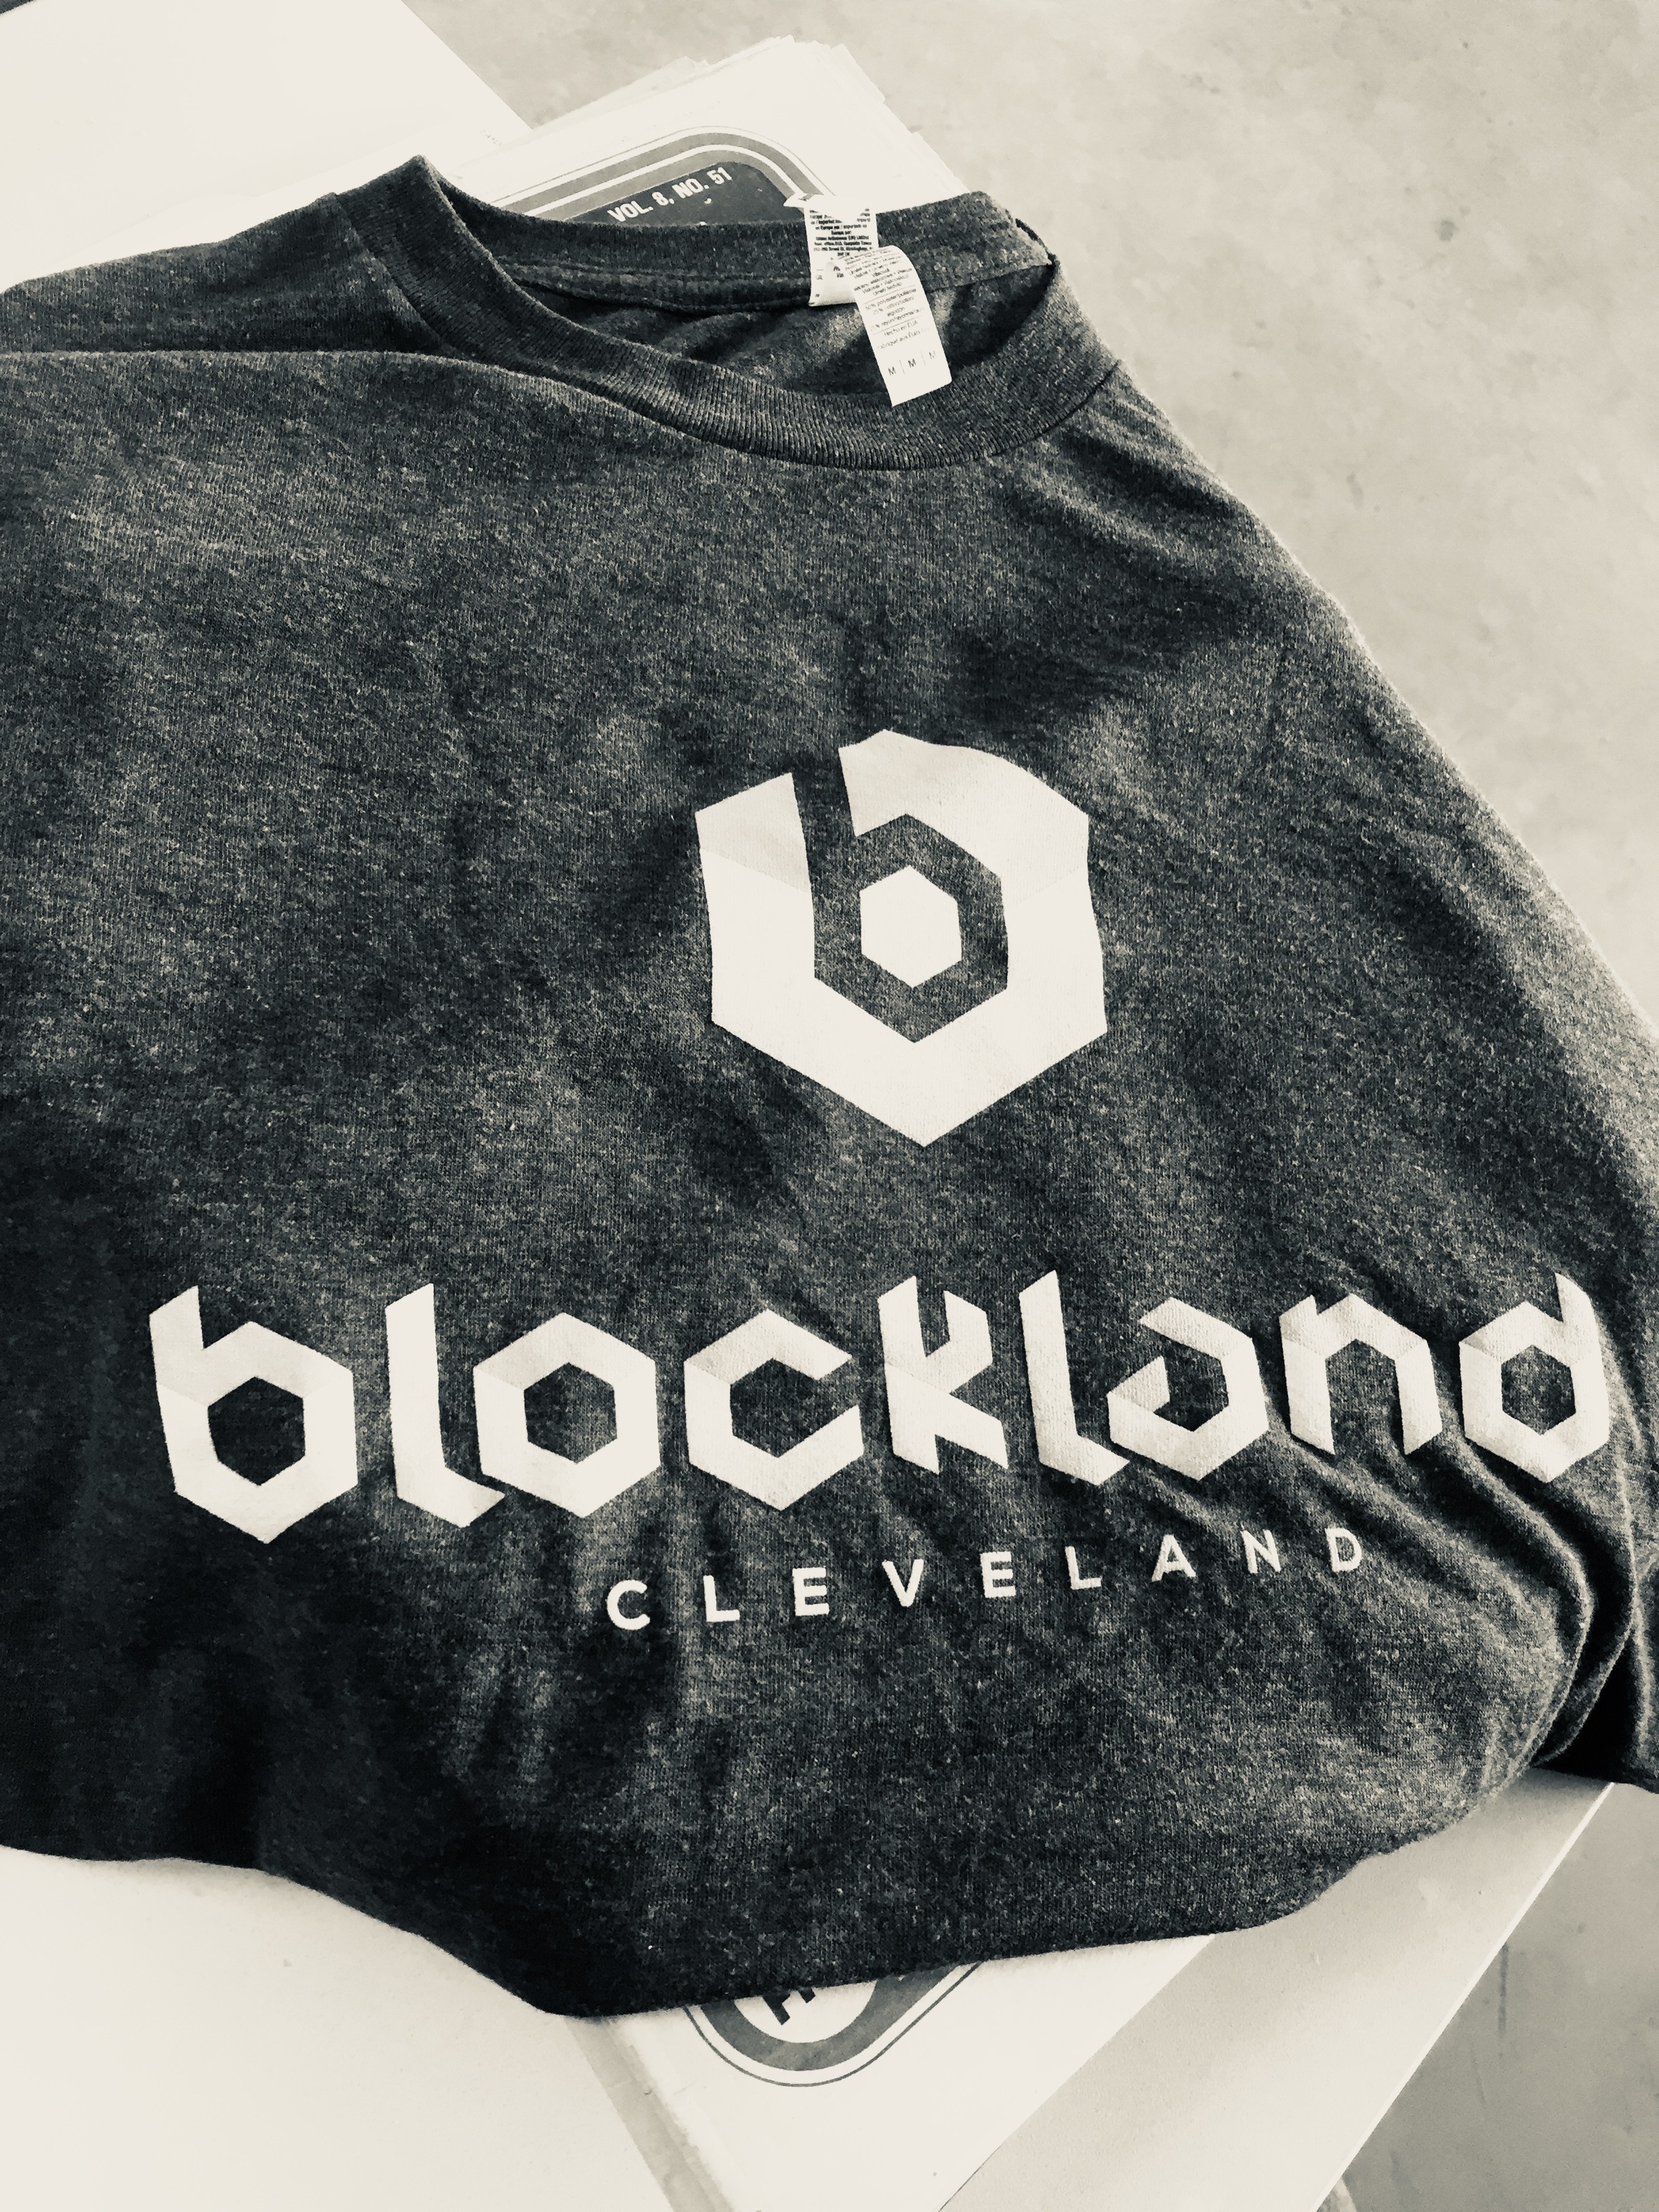 Blockland is NOT dead